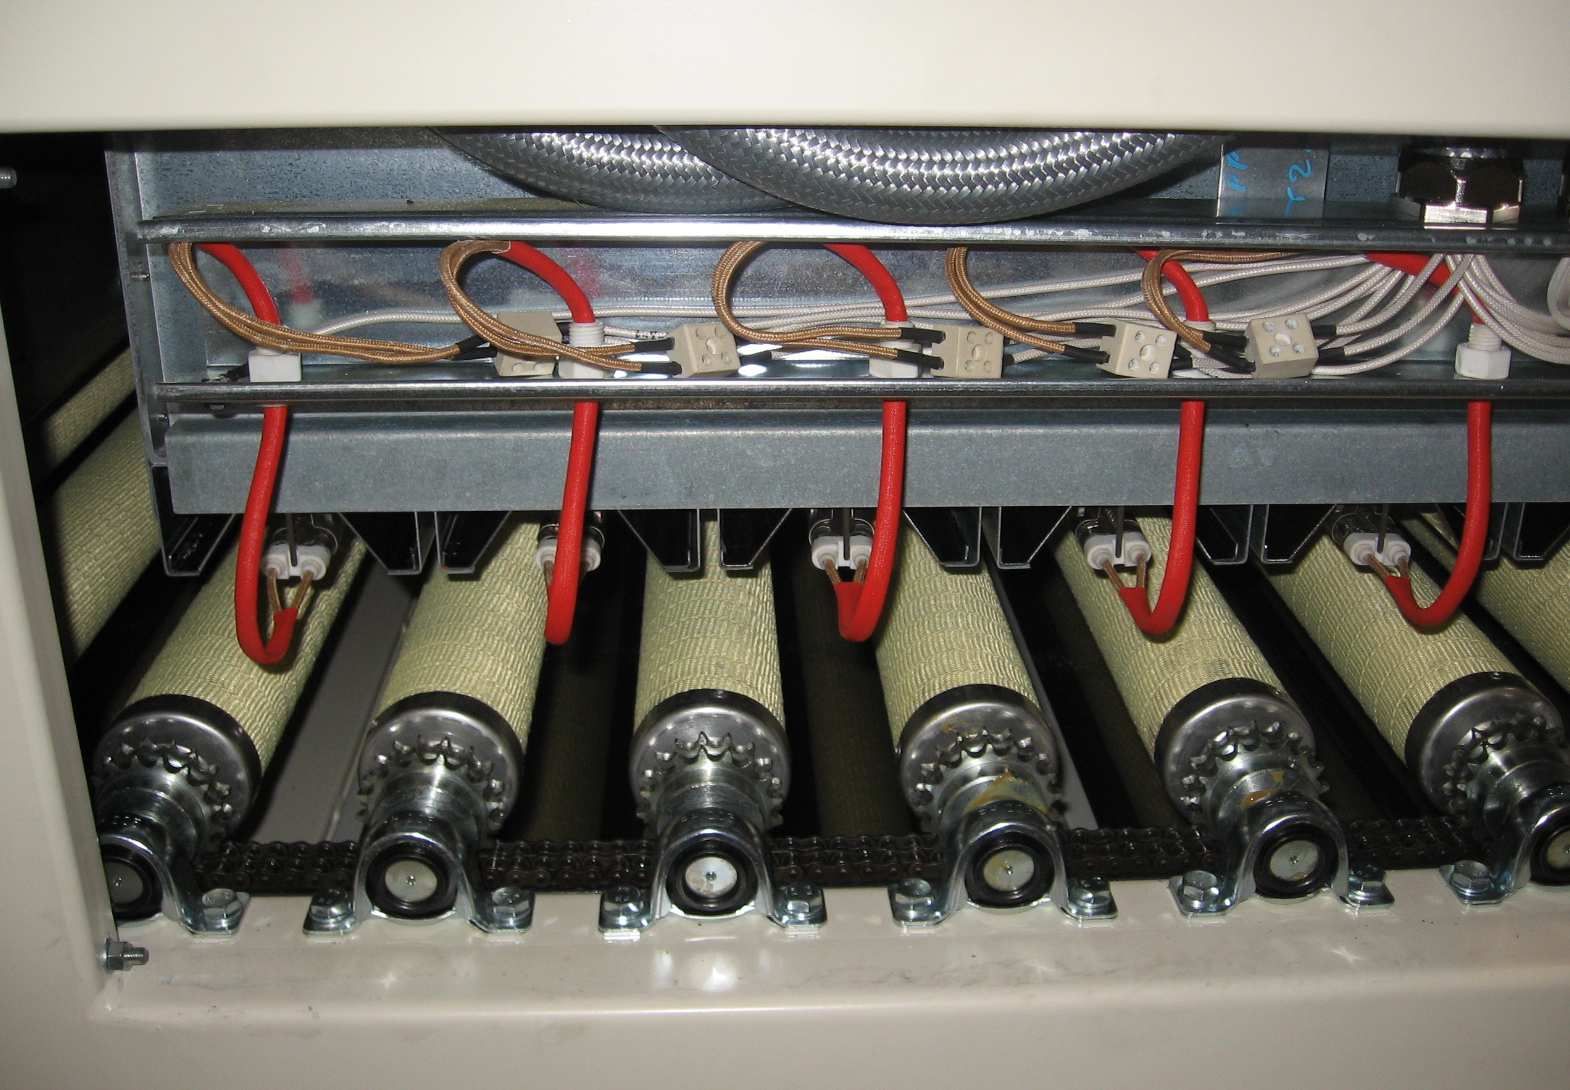 IR lamps and transport rollers